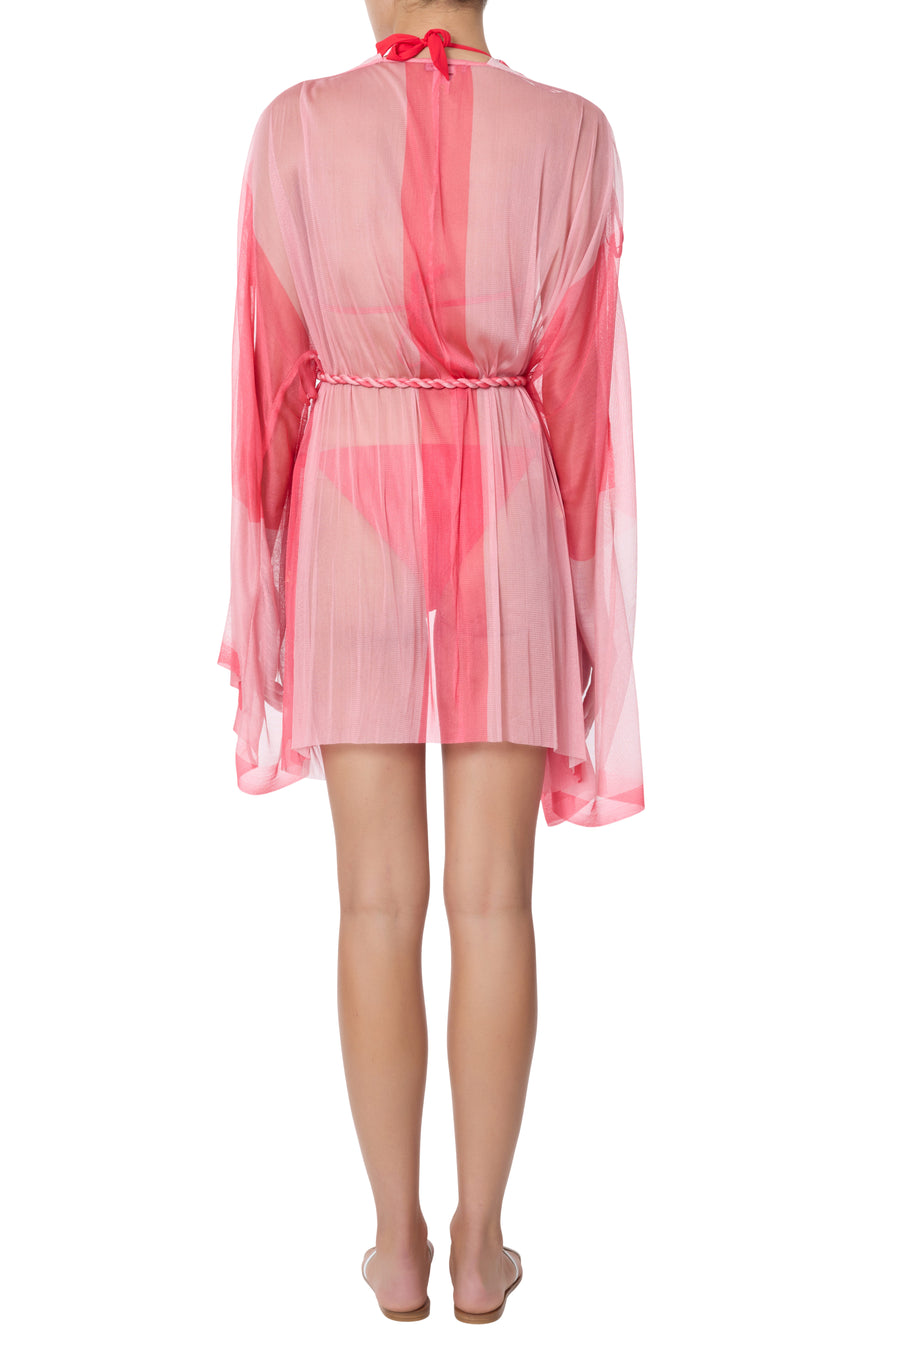 Klotho coral-pink cover-up